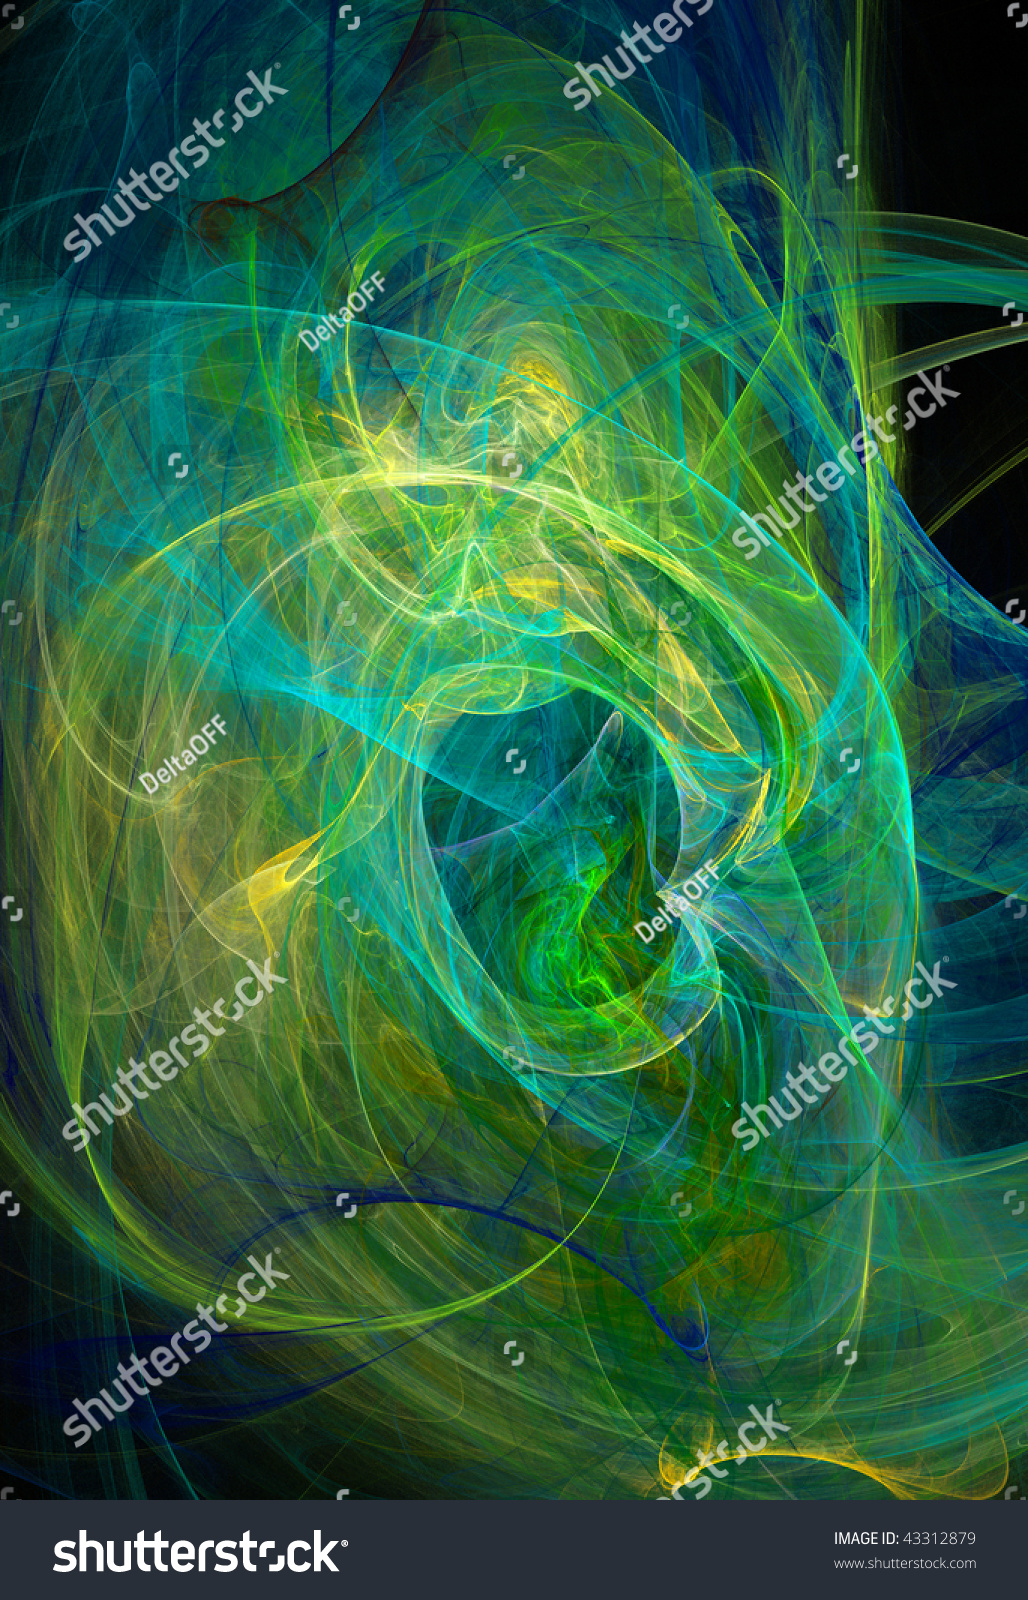 Download Edit Vectors Free Online - abstract background ...